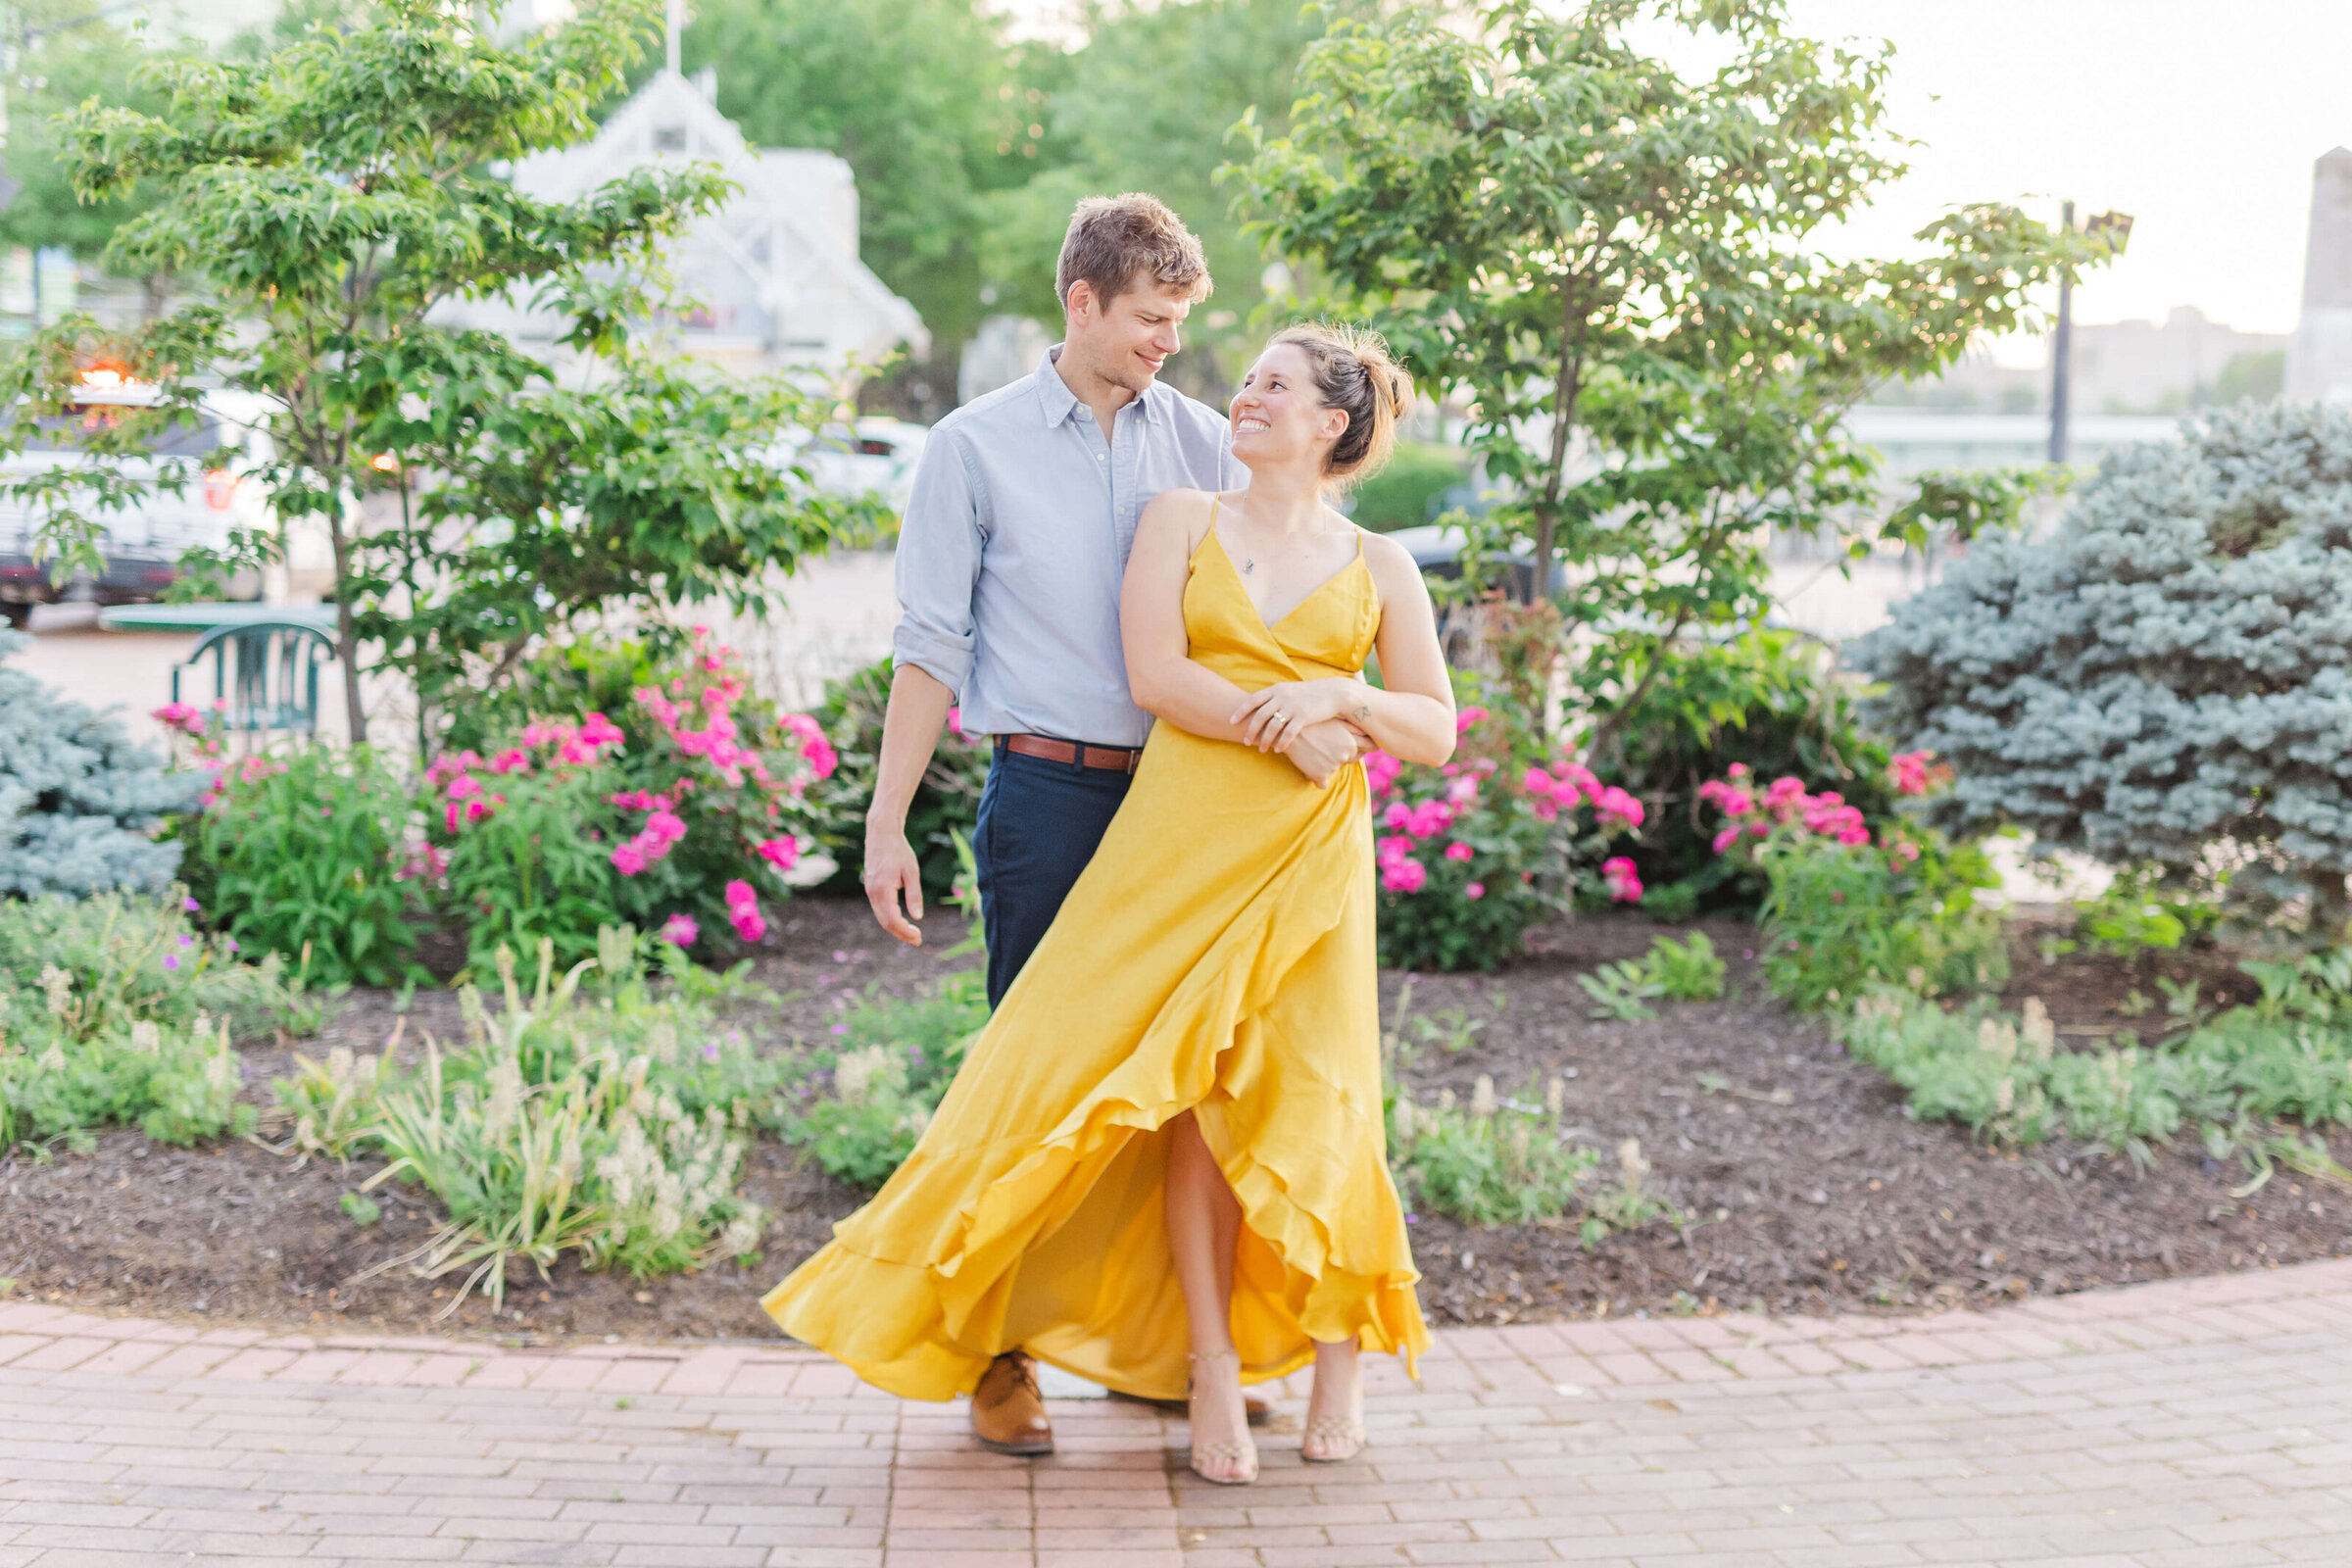 A man in a blue shirt and navy pants, twirls his fiance, who is wearing a bright yellow dress. They are standing at a park in Dayton ohio with lots of green trees and pink flowers.